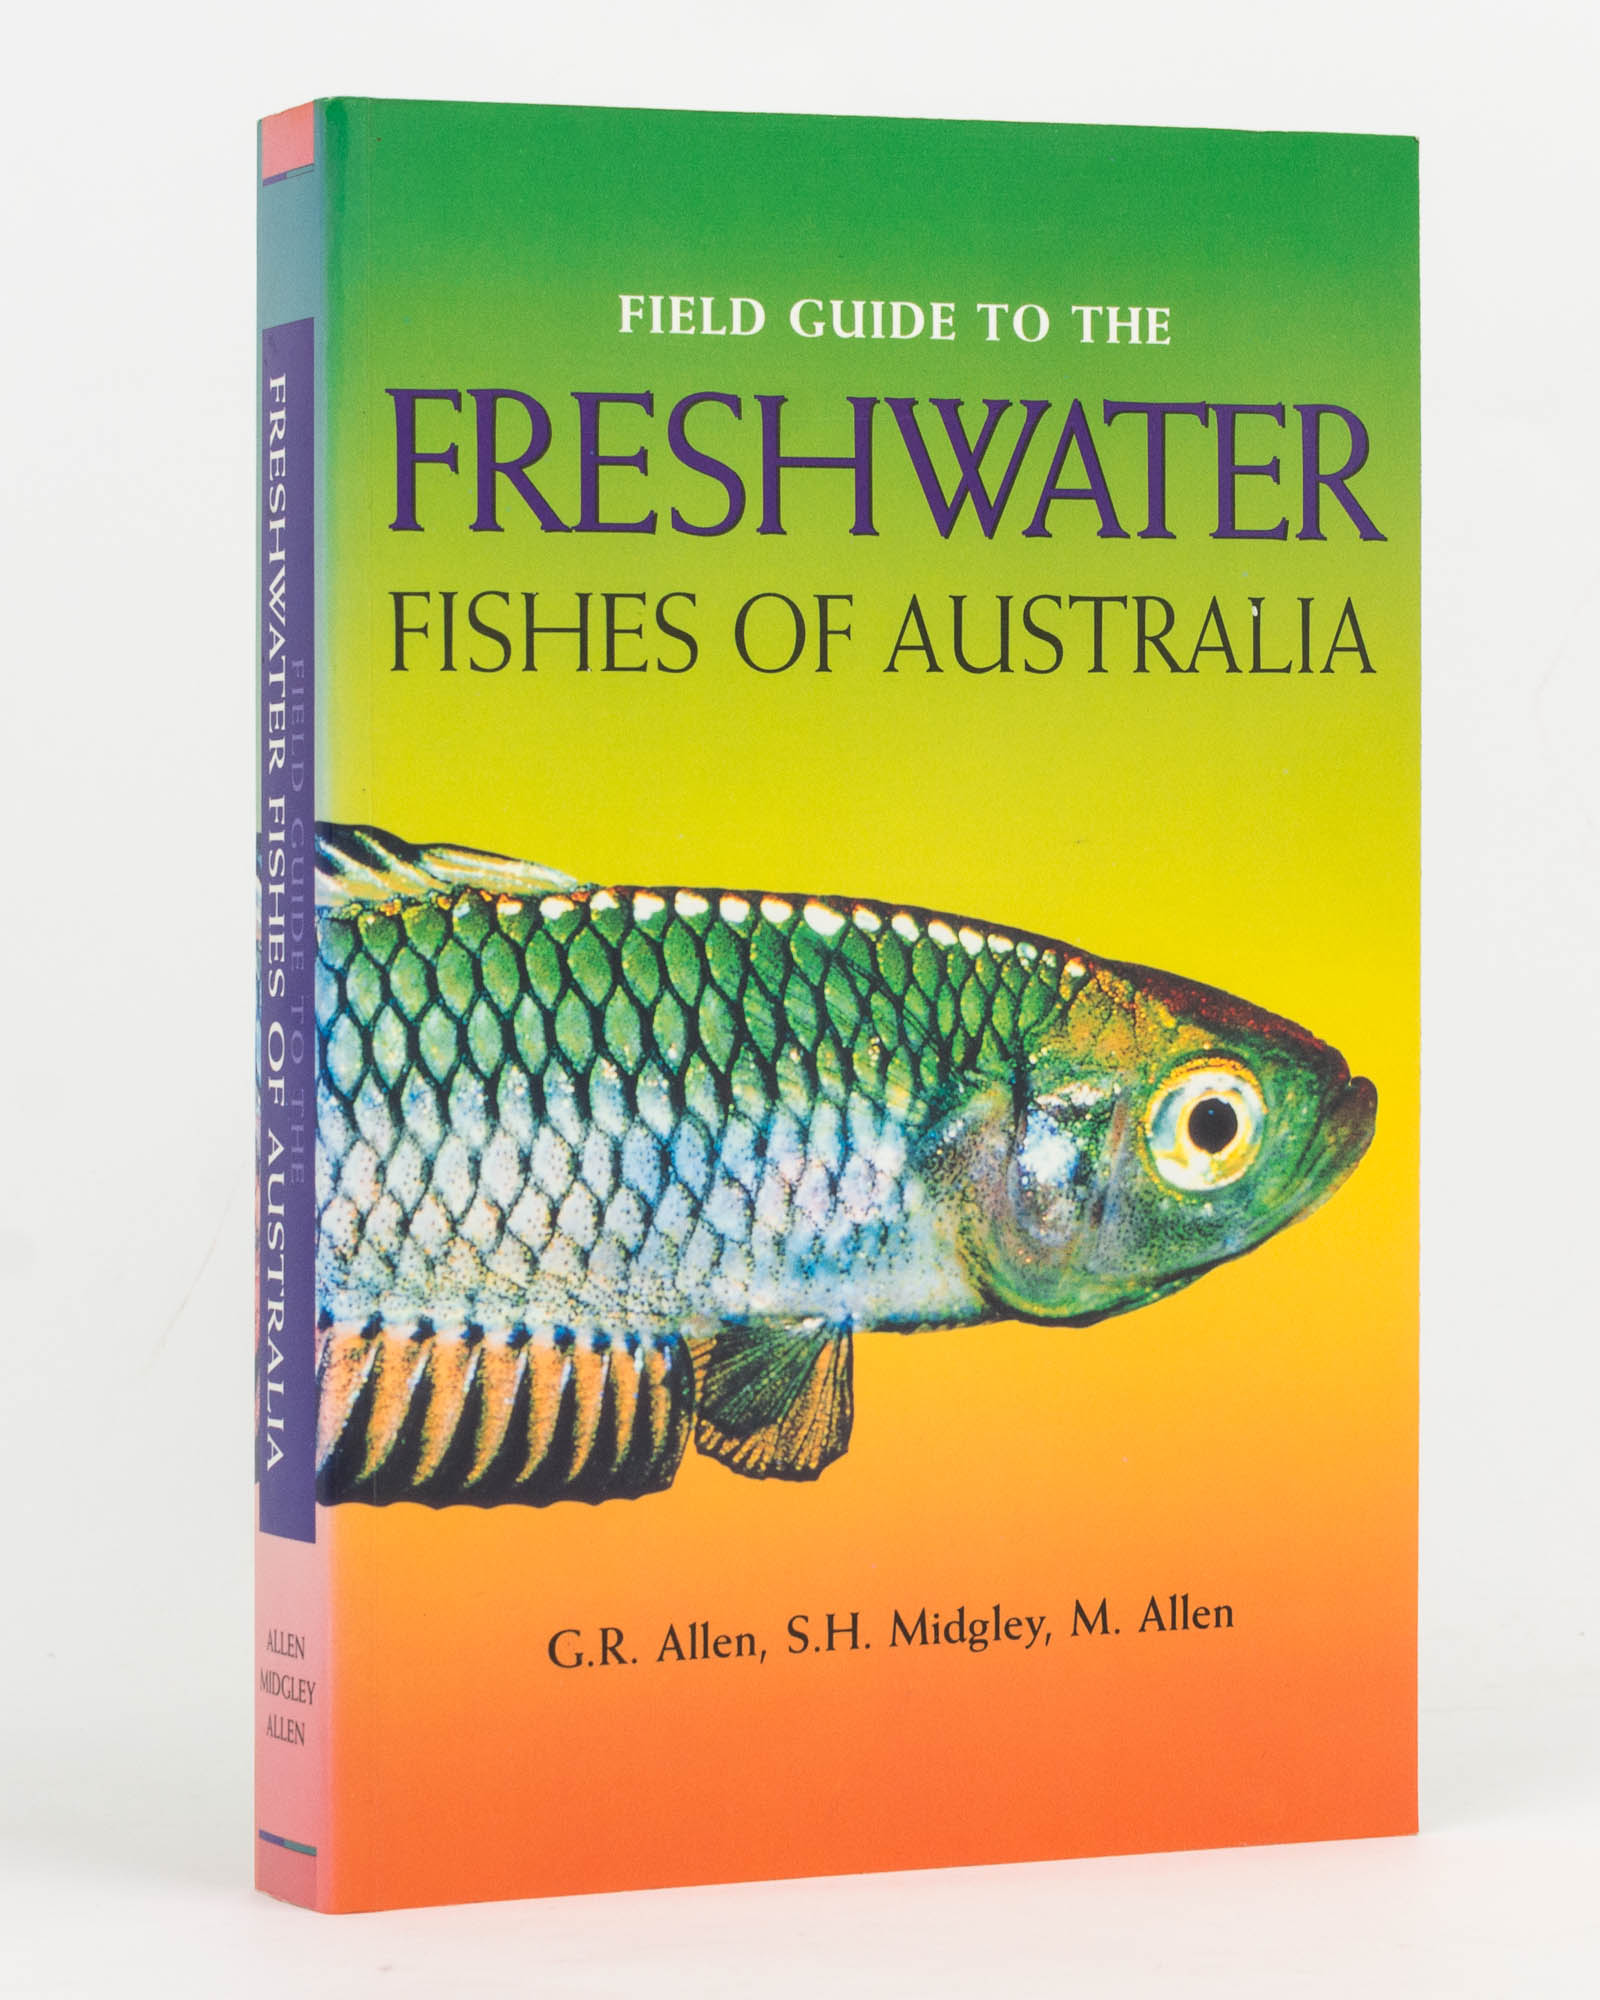 Field Guide to the Freshwater Fishes of Australia - ALLEN, G.R., S.H. MIDGLEY, M. ALLEN